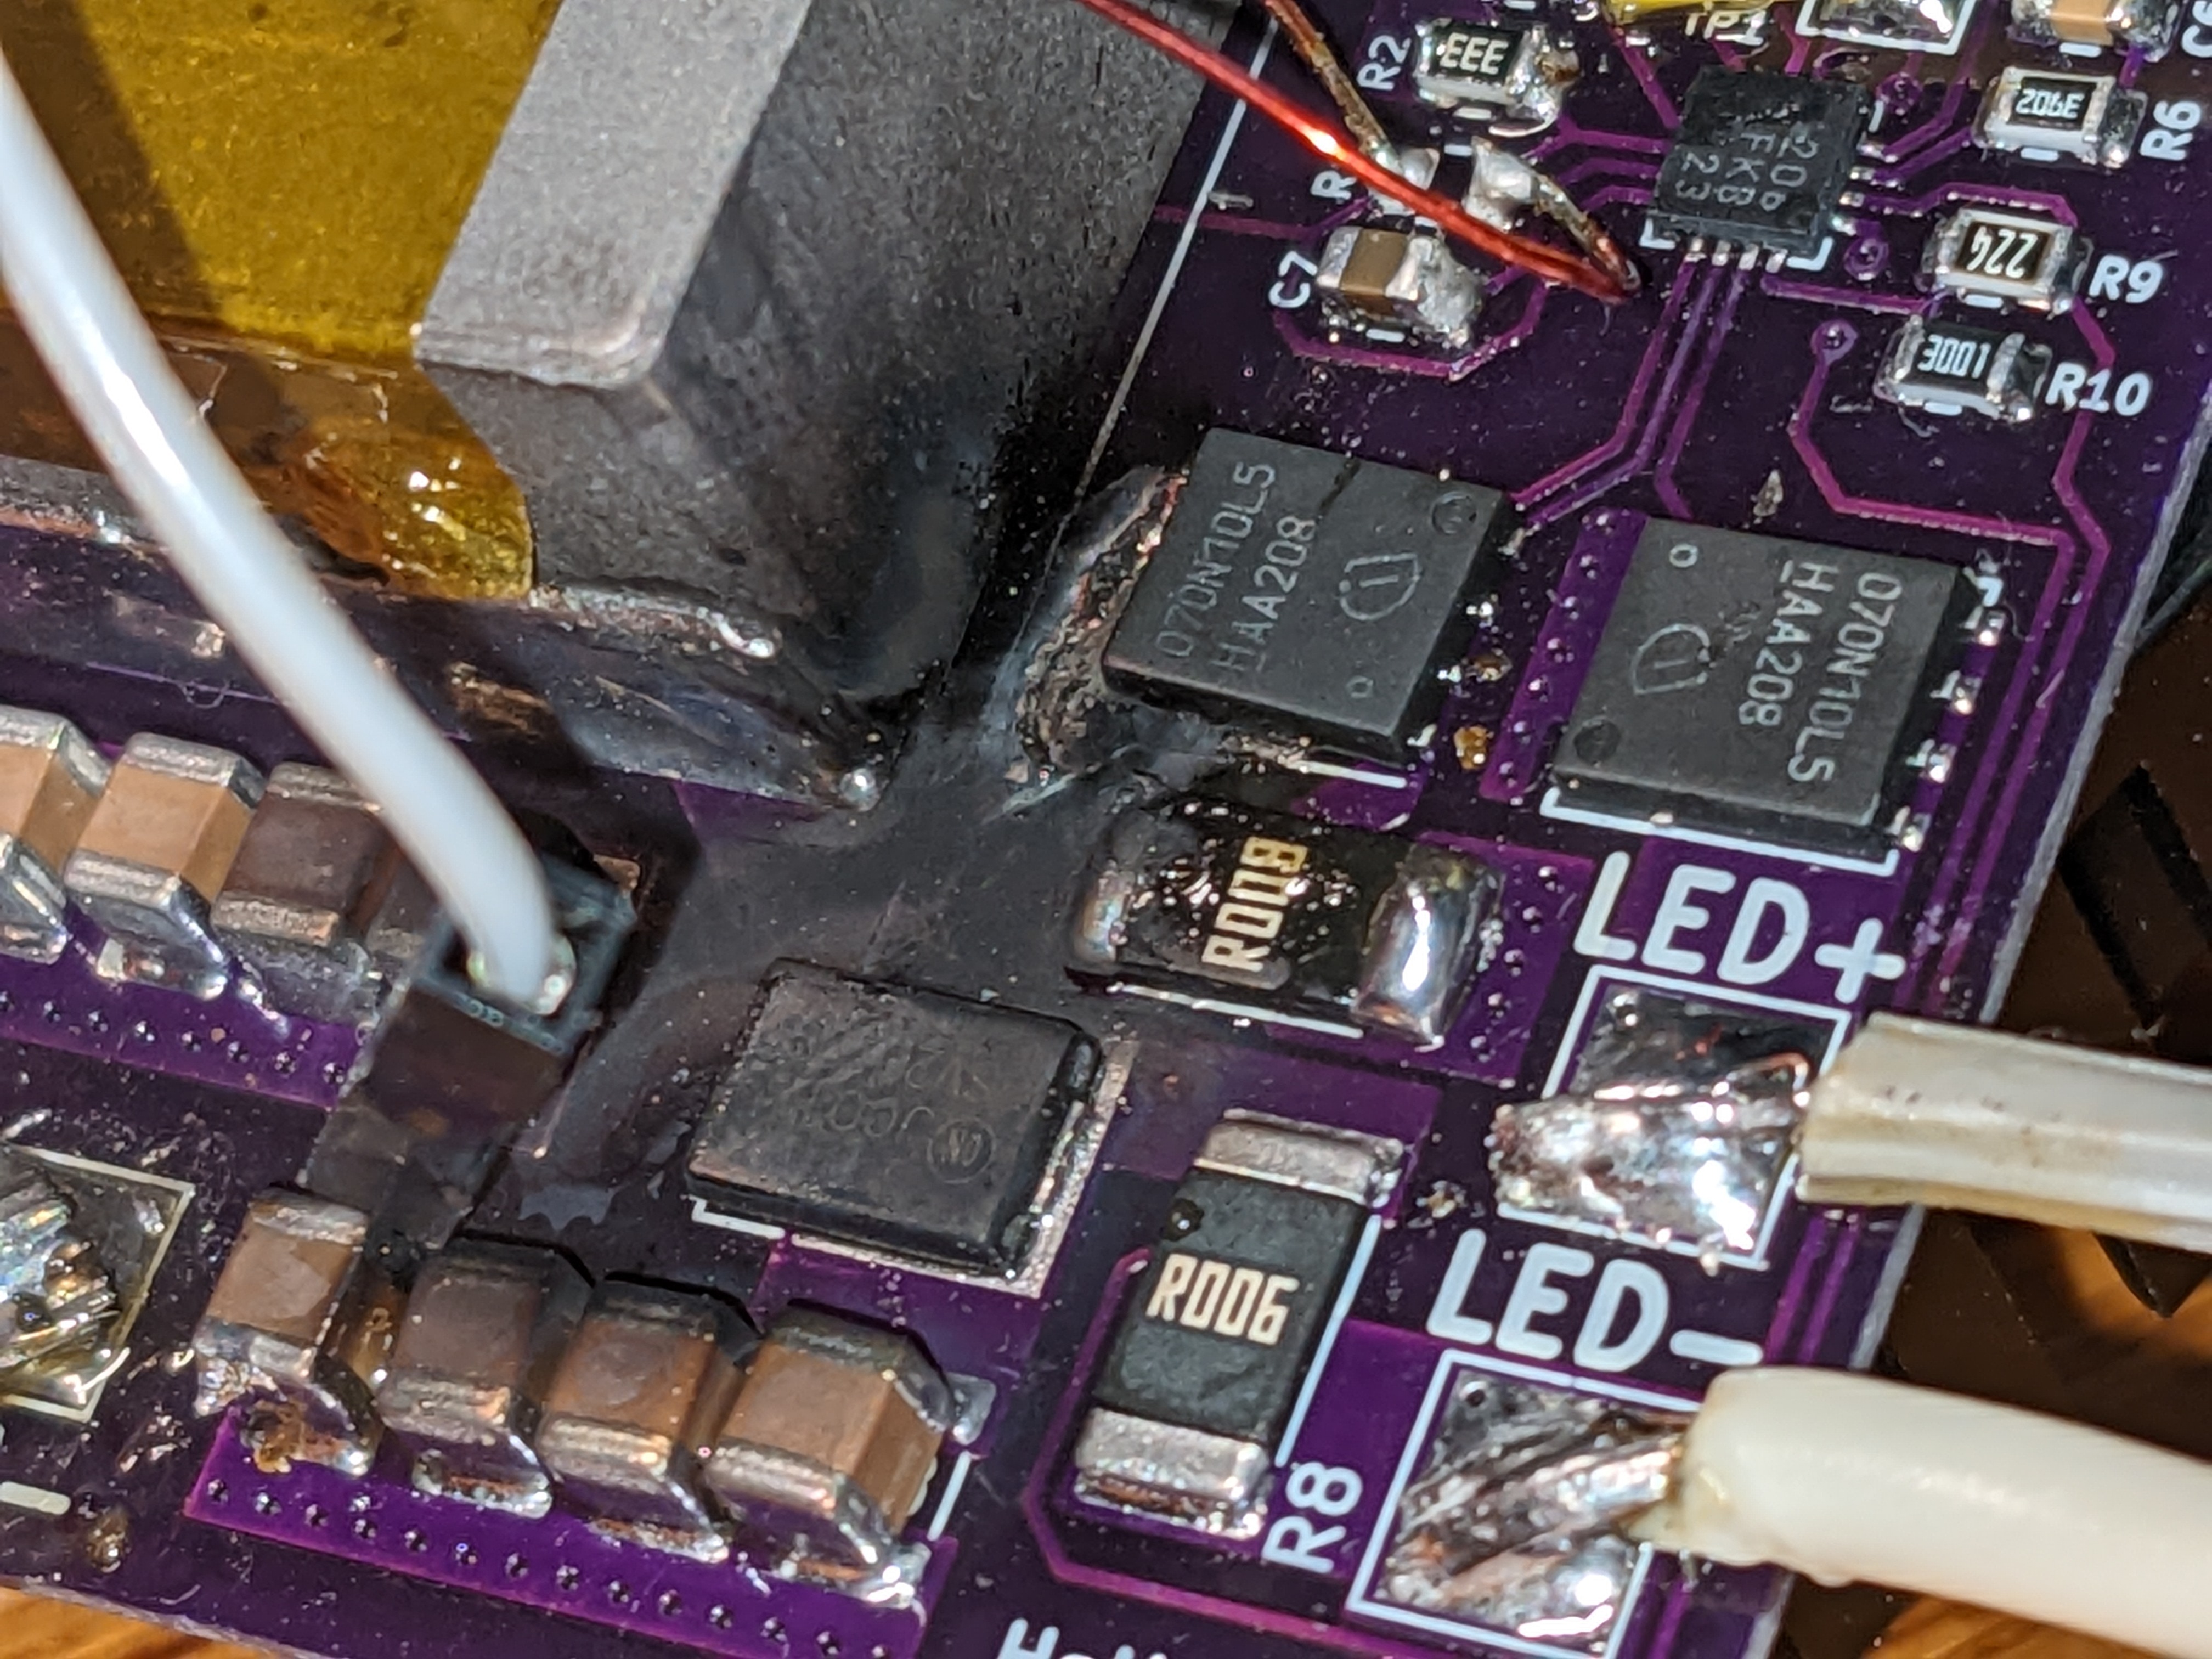 Another circuit board with a burned out trace